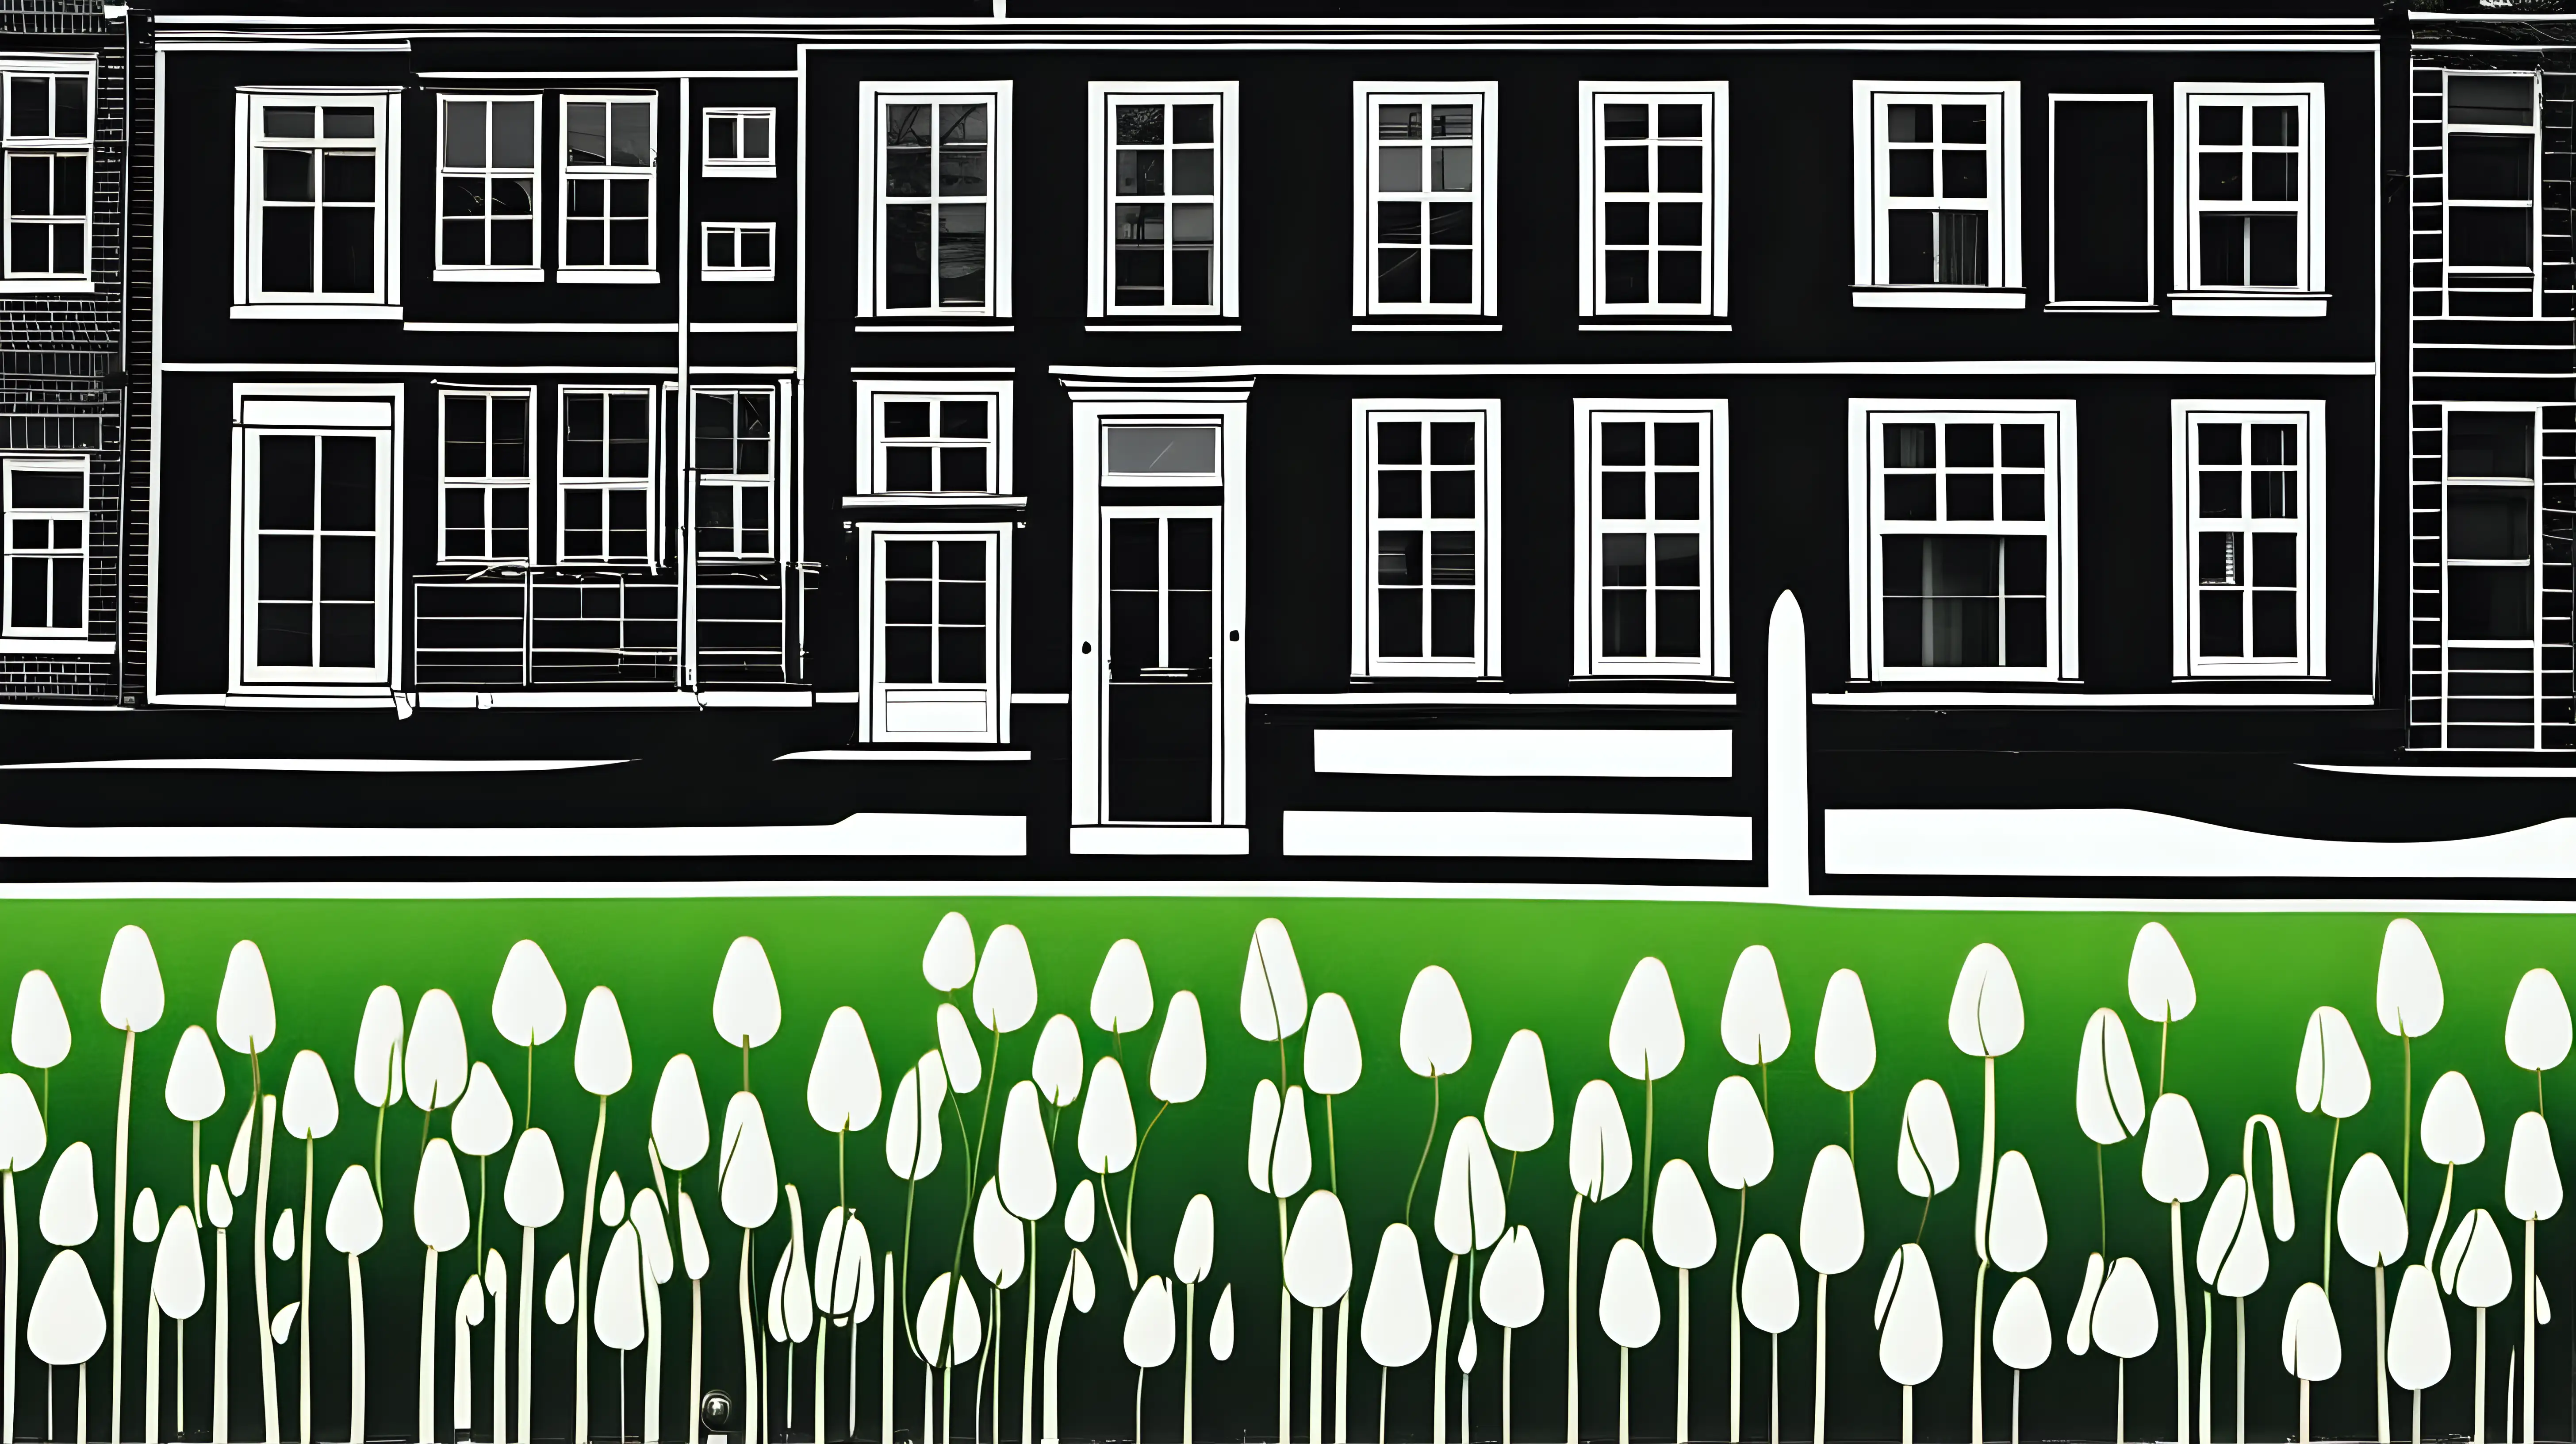  a green and black pictogram of a large white snowdrop in front of a silhouette of an Amsterdam canal house 